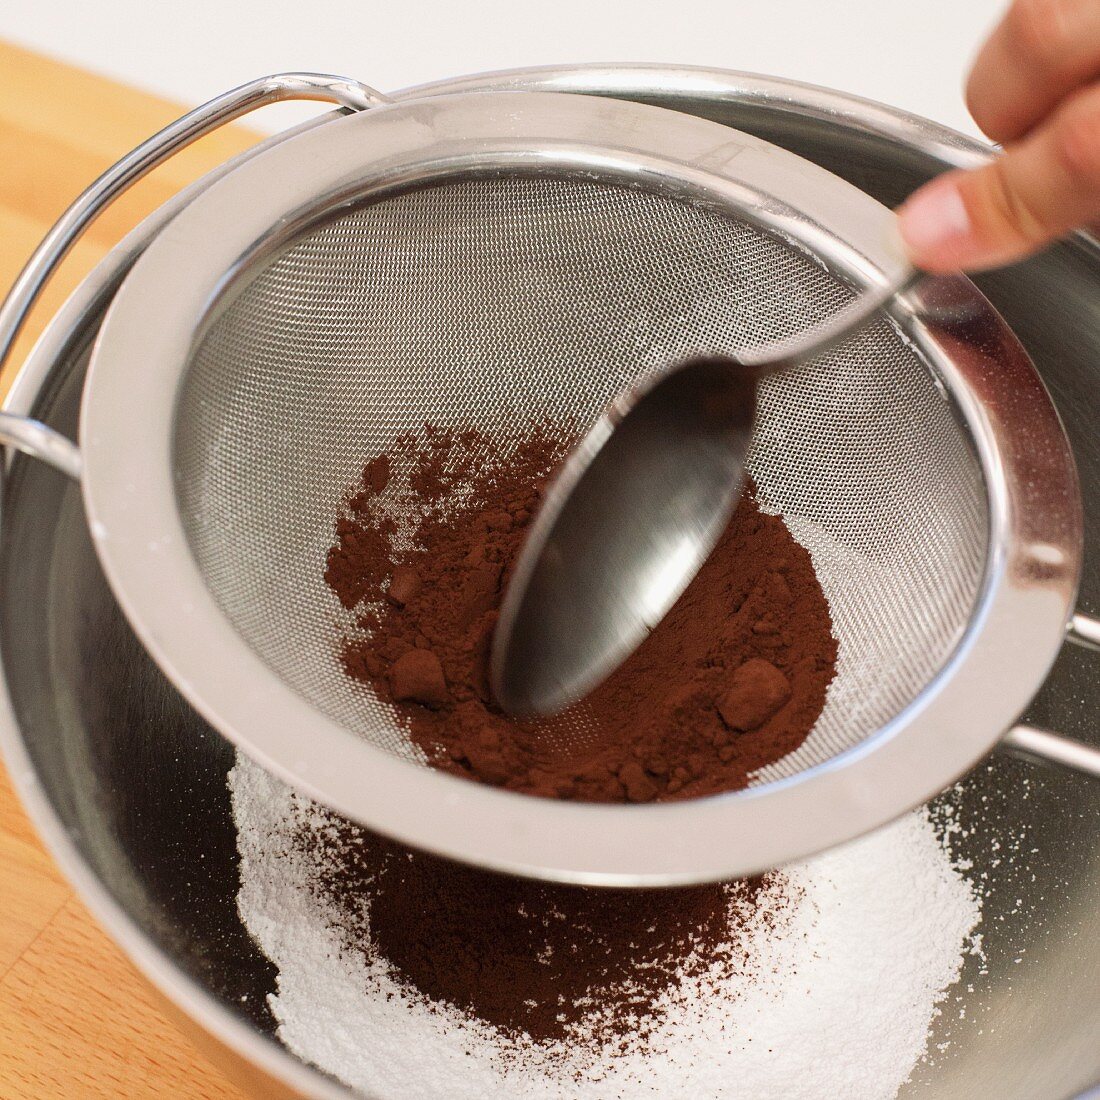 Cocoa being pressed through a sieve for making winter-spiced cream liqueur